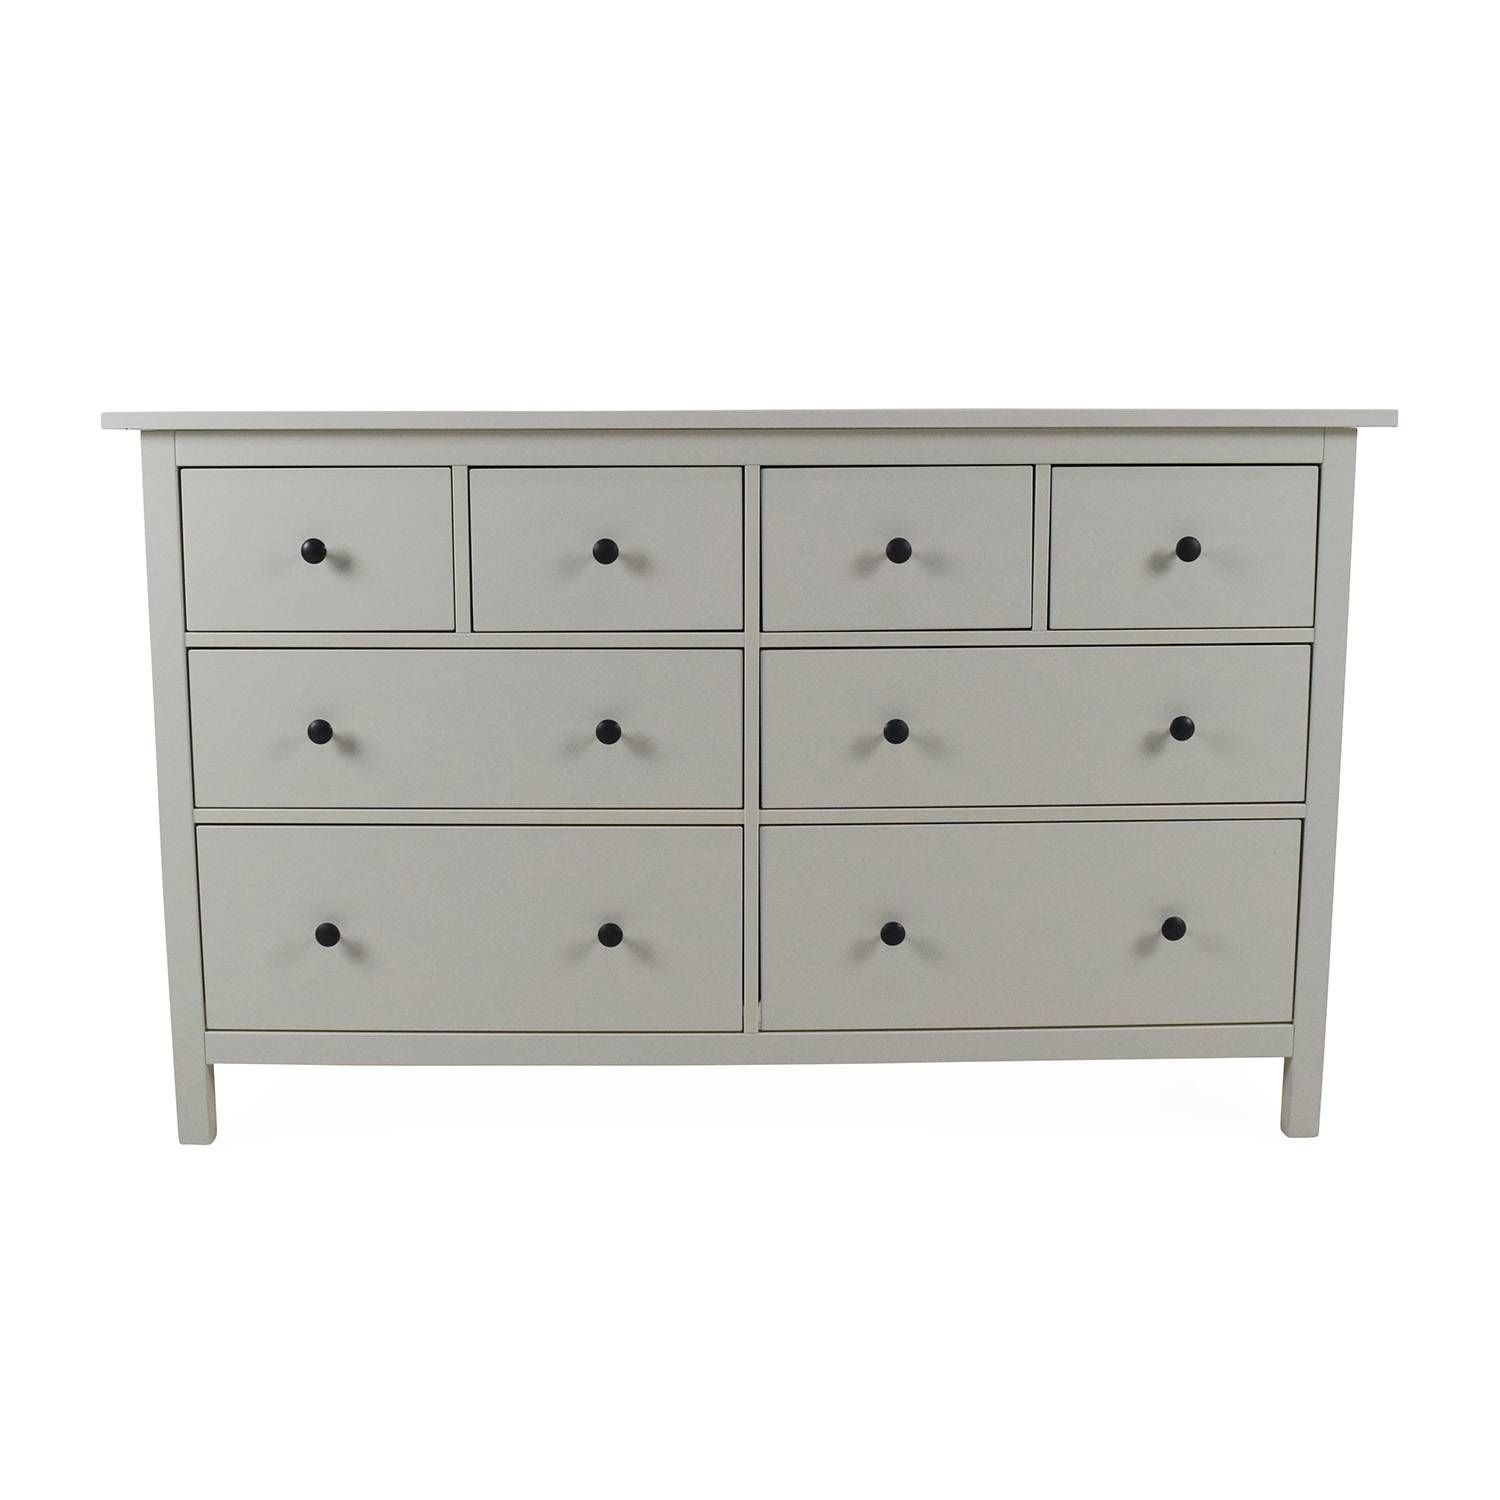 49% Off – Ikea Ikea Hemnes 8 Drawer Dresser / Storage Pertaining To Most Recent Second Hand Dressers And Sideboards (Photo 4 of 15)